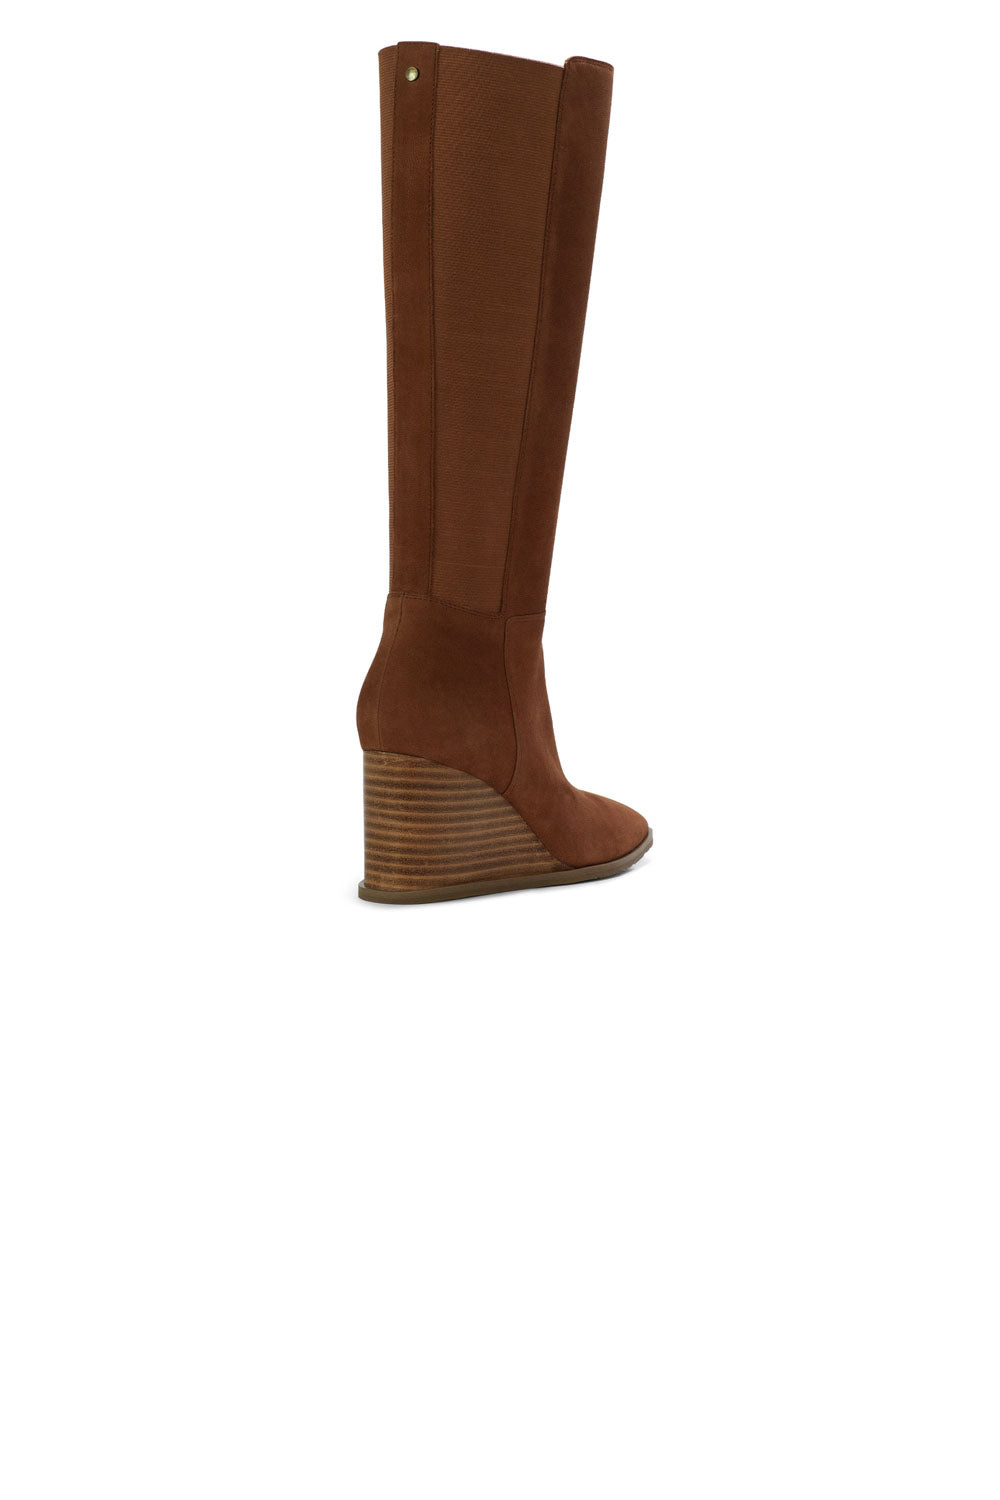 NYDJ Jessica Wedge Boots In Brushed Leather - Cognac